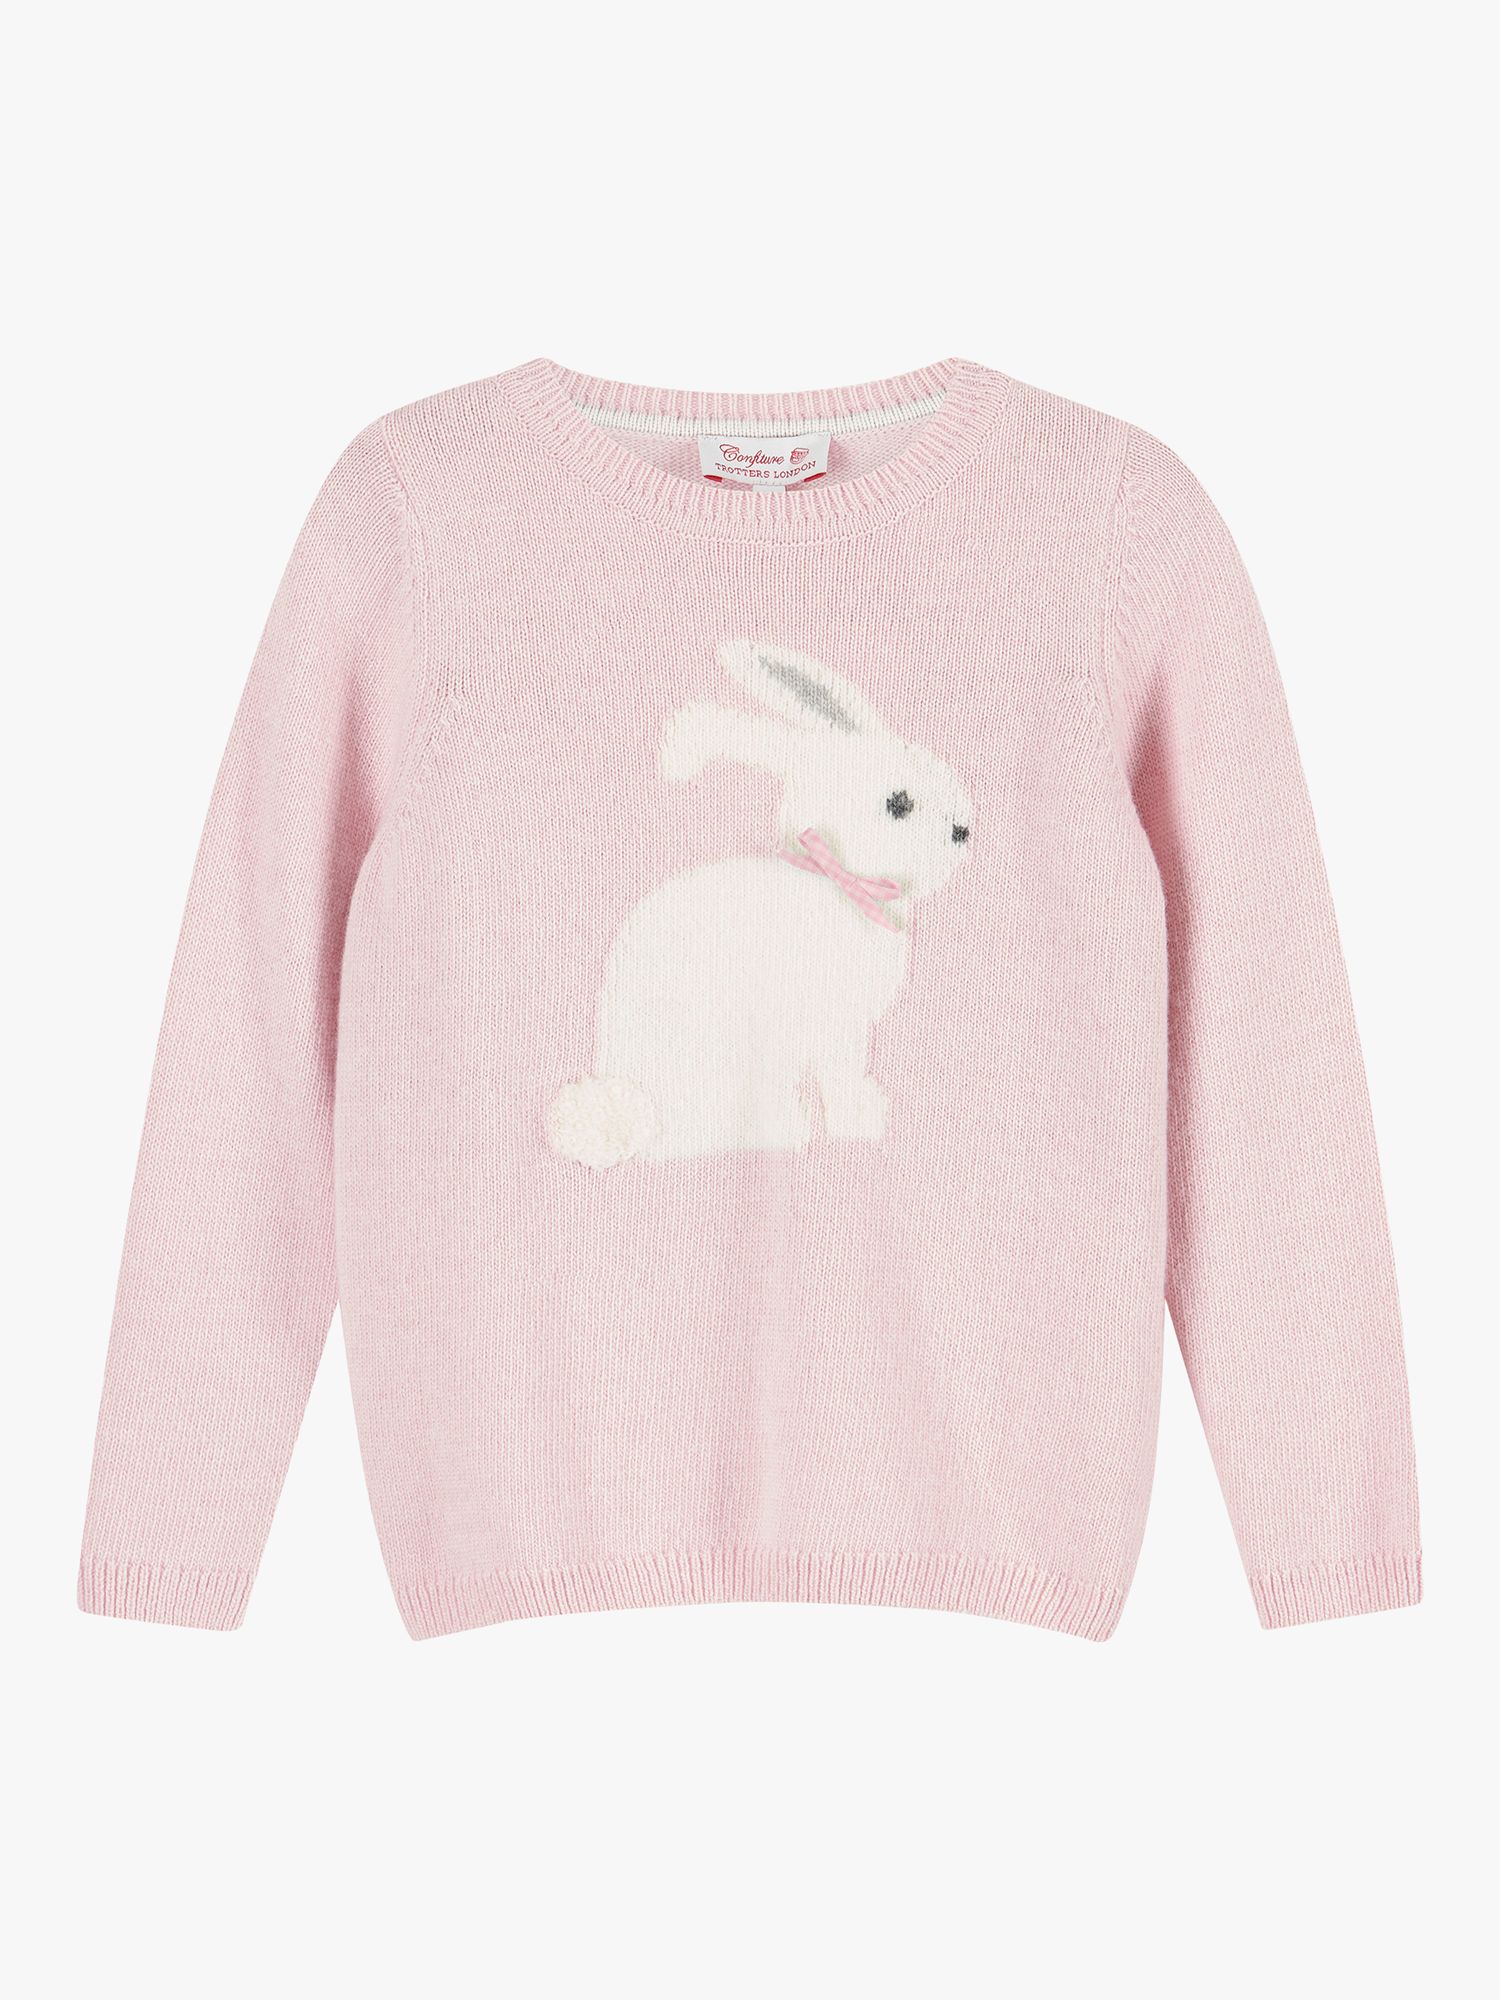 Trotters Kids' Coco Bunny Jumper, Pale Pink, 2-3 years